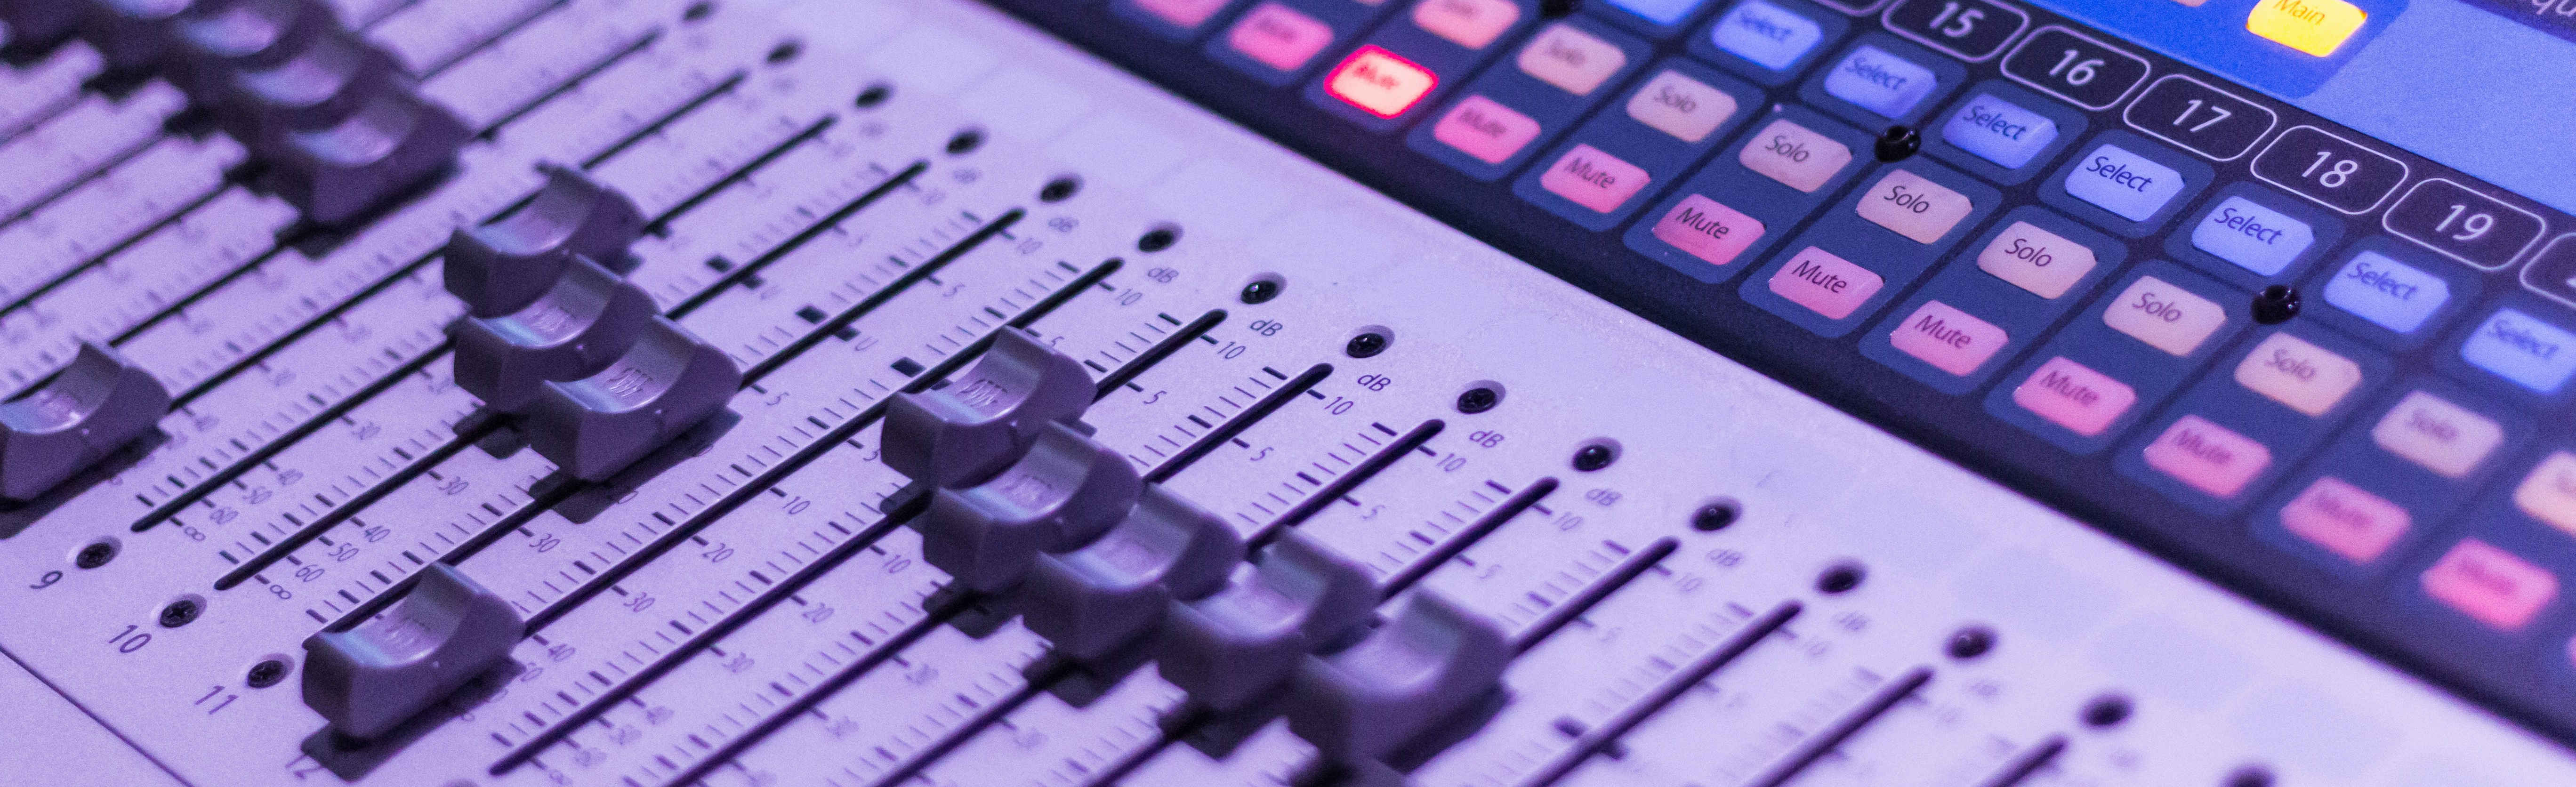 Close-up view of an audio mixing board